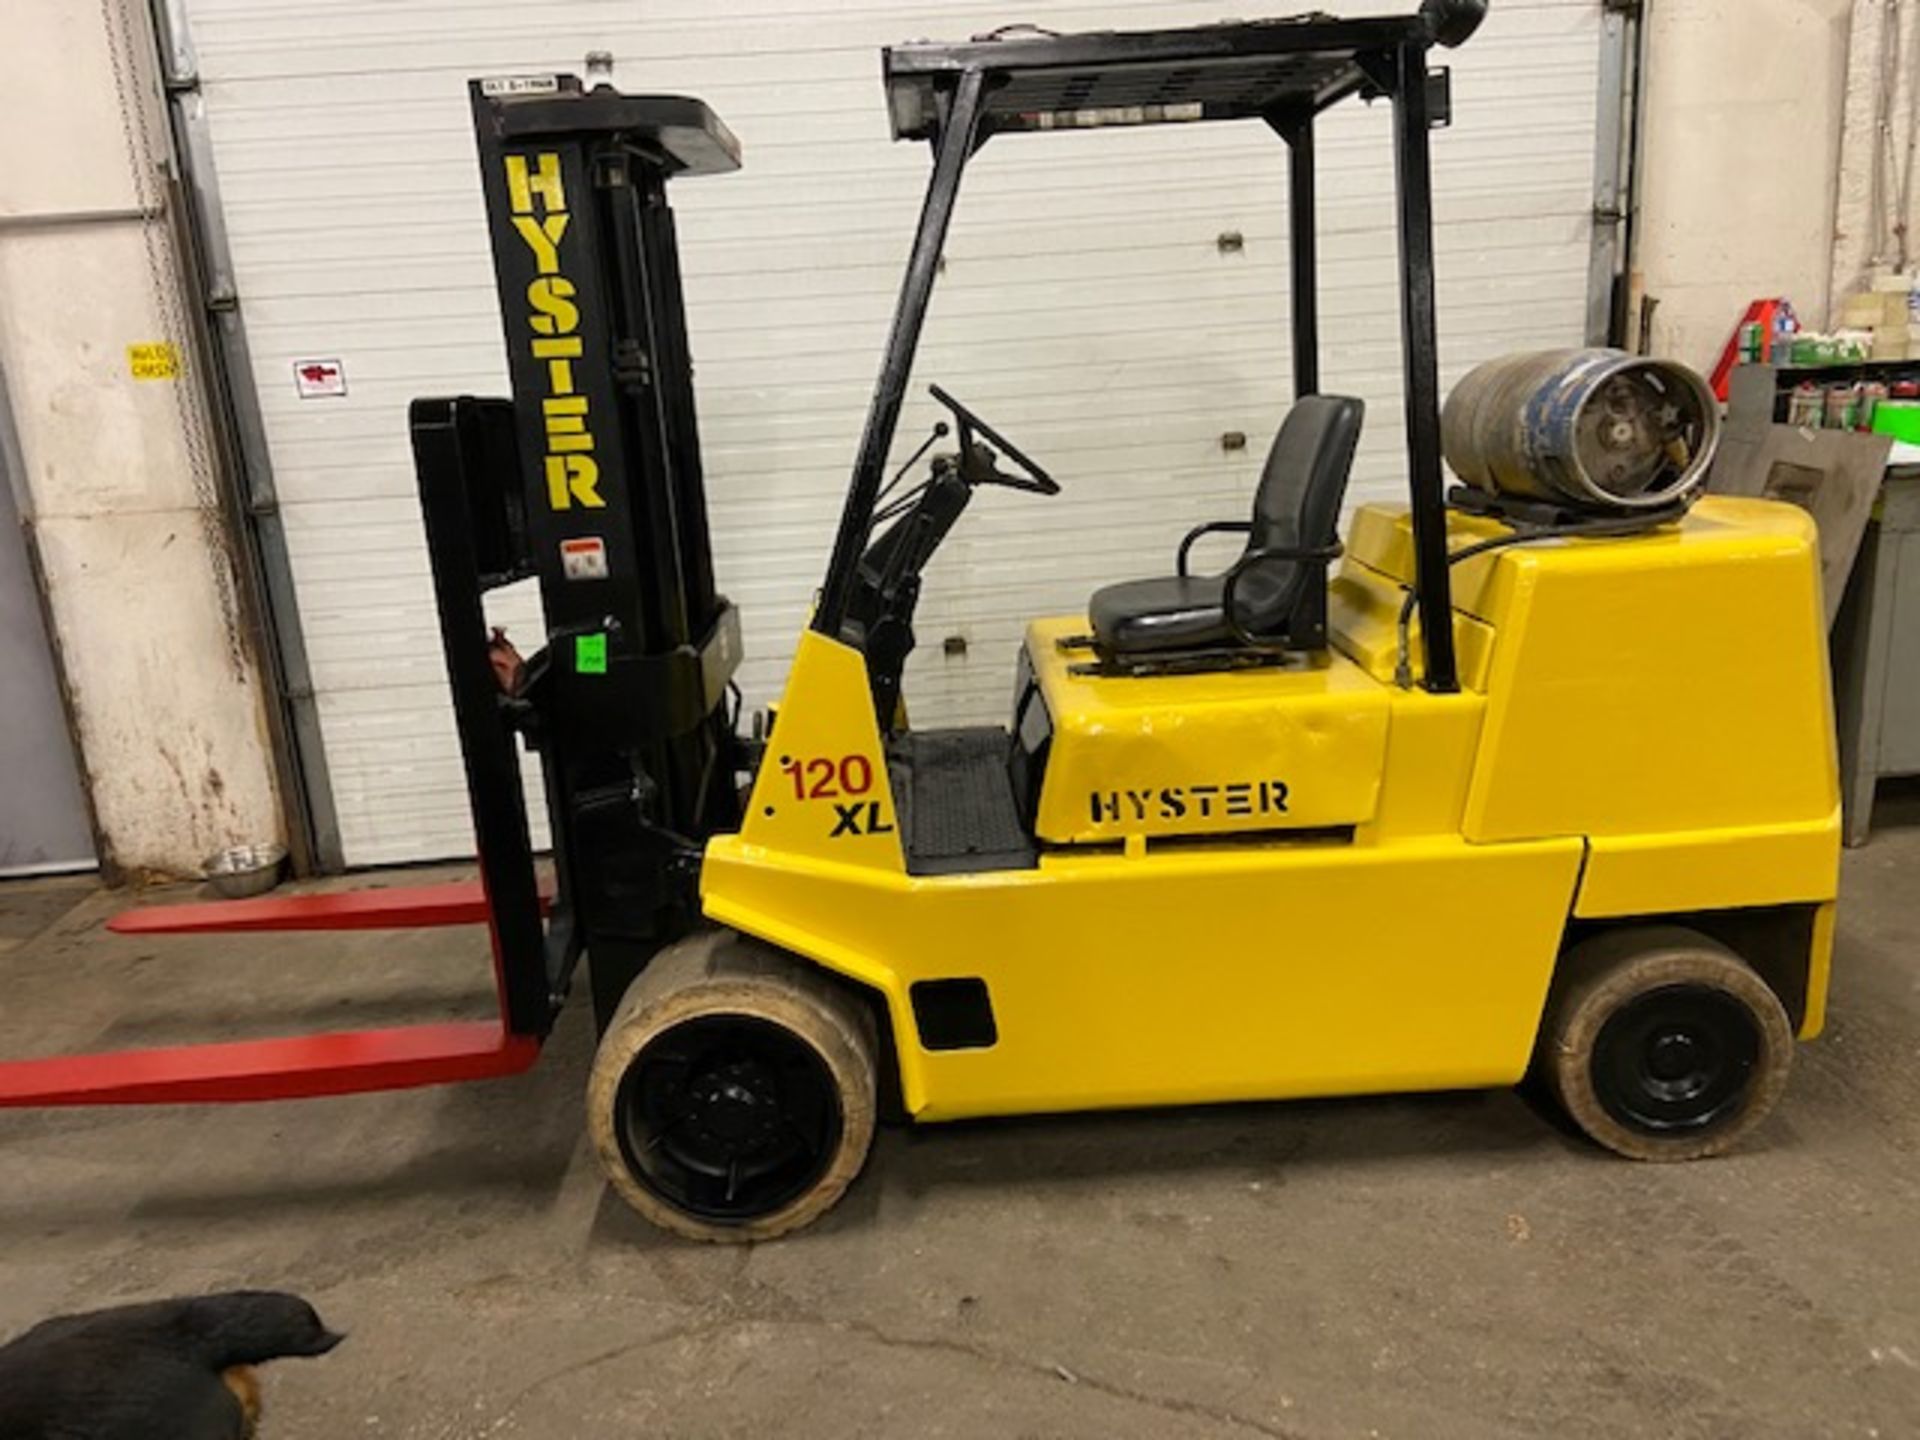 FREE CUSTOMS - Hyster 12000lbs Capacity Forklift 120XL LPG (propane) (no propane tank included)